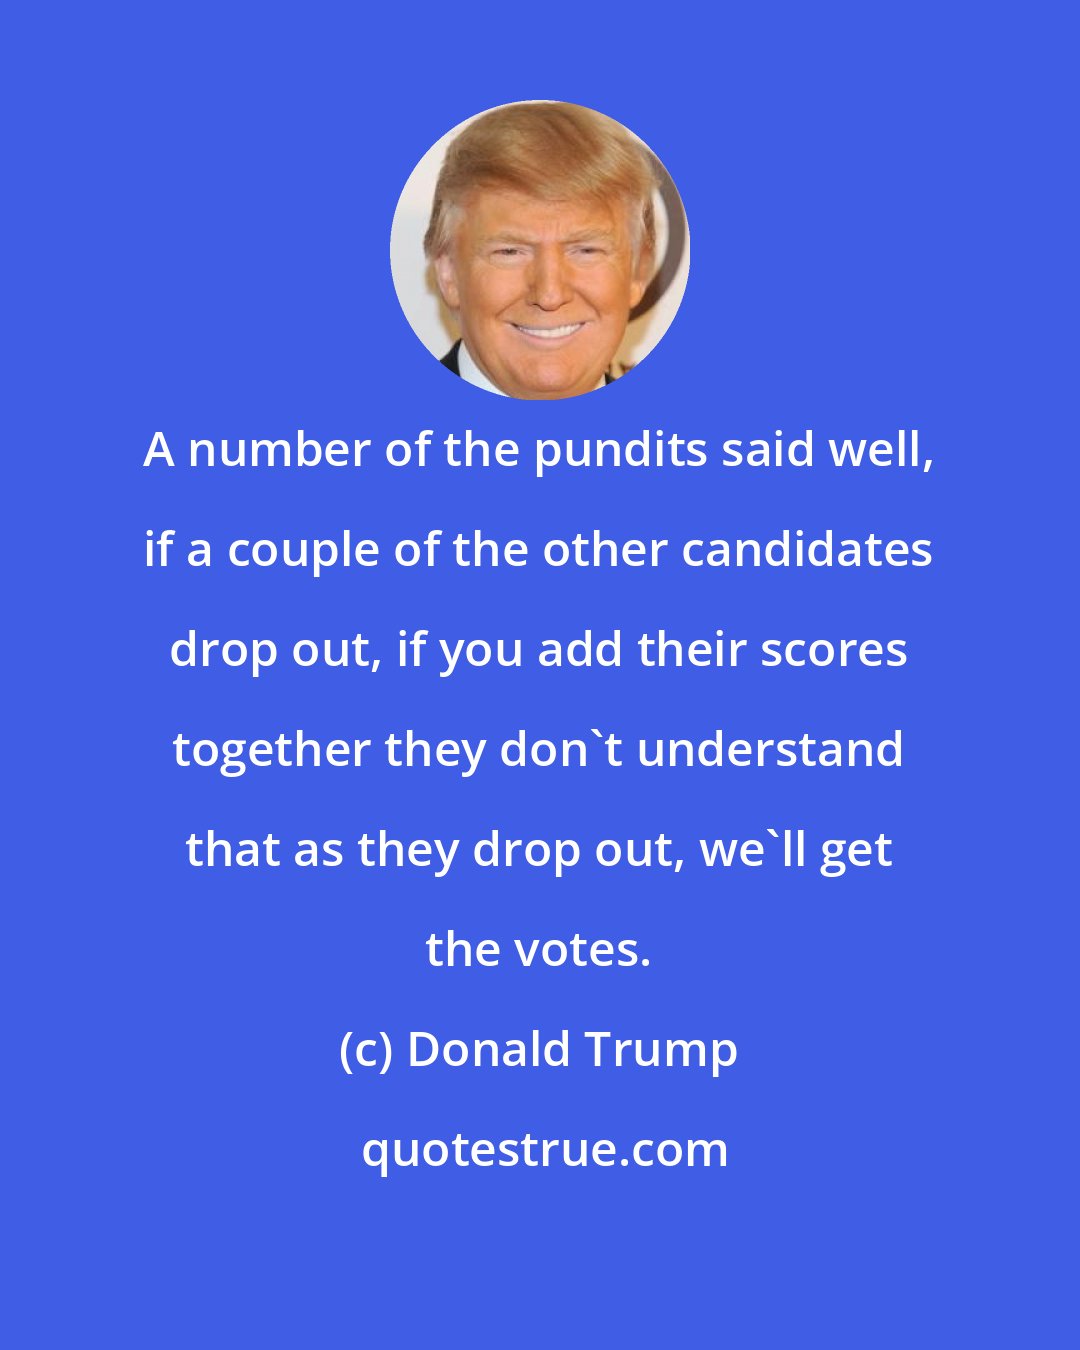 Donald Trump: A number of the pundits said well, if a couple of the other candidates drop out, if you add their scores together they don`t understand that as they drop out, we`ll get the votes.